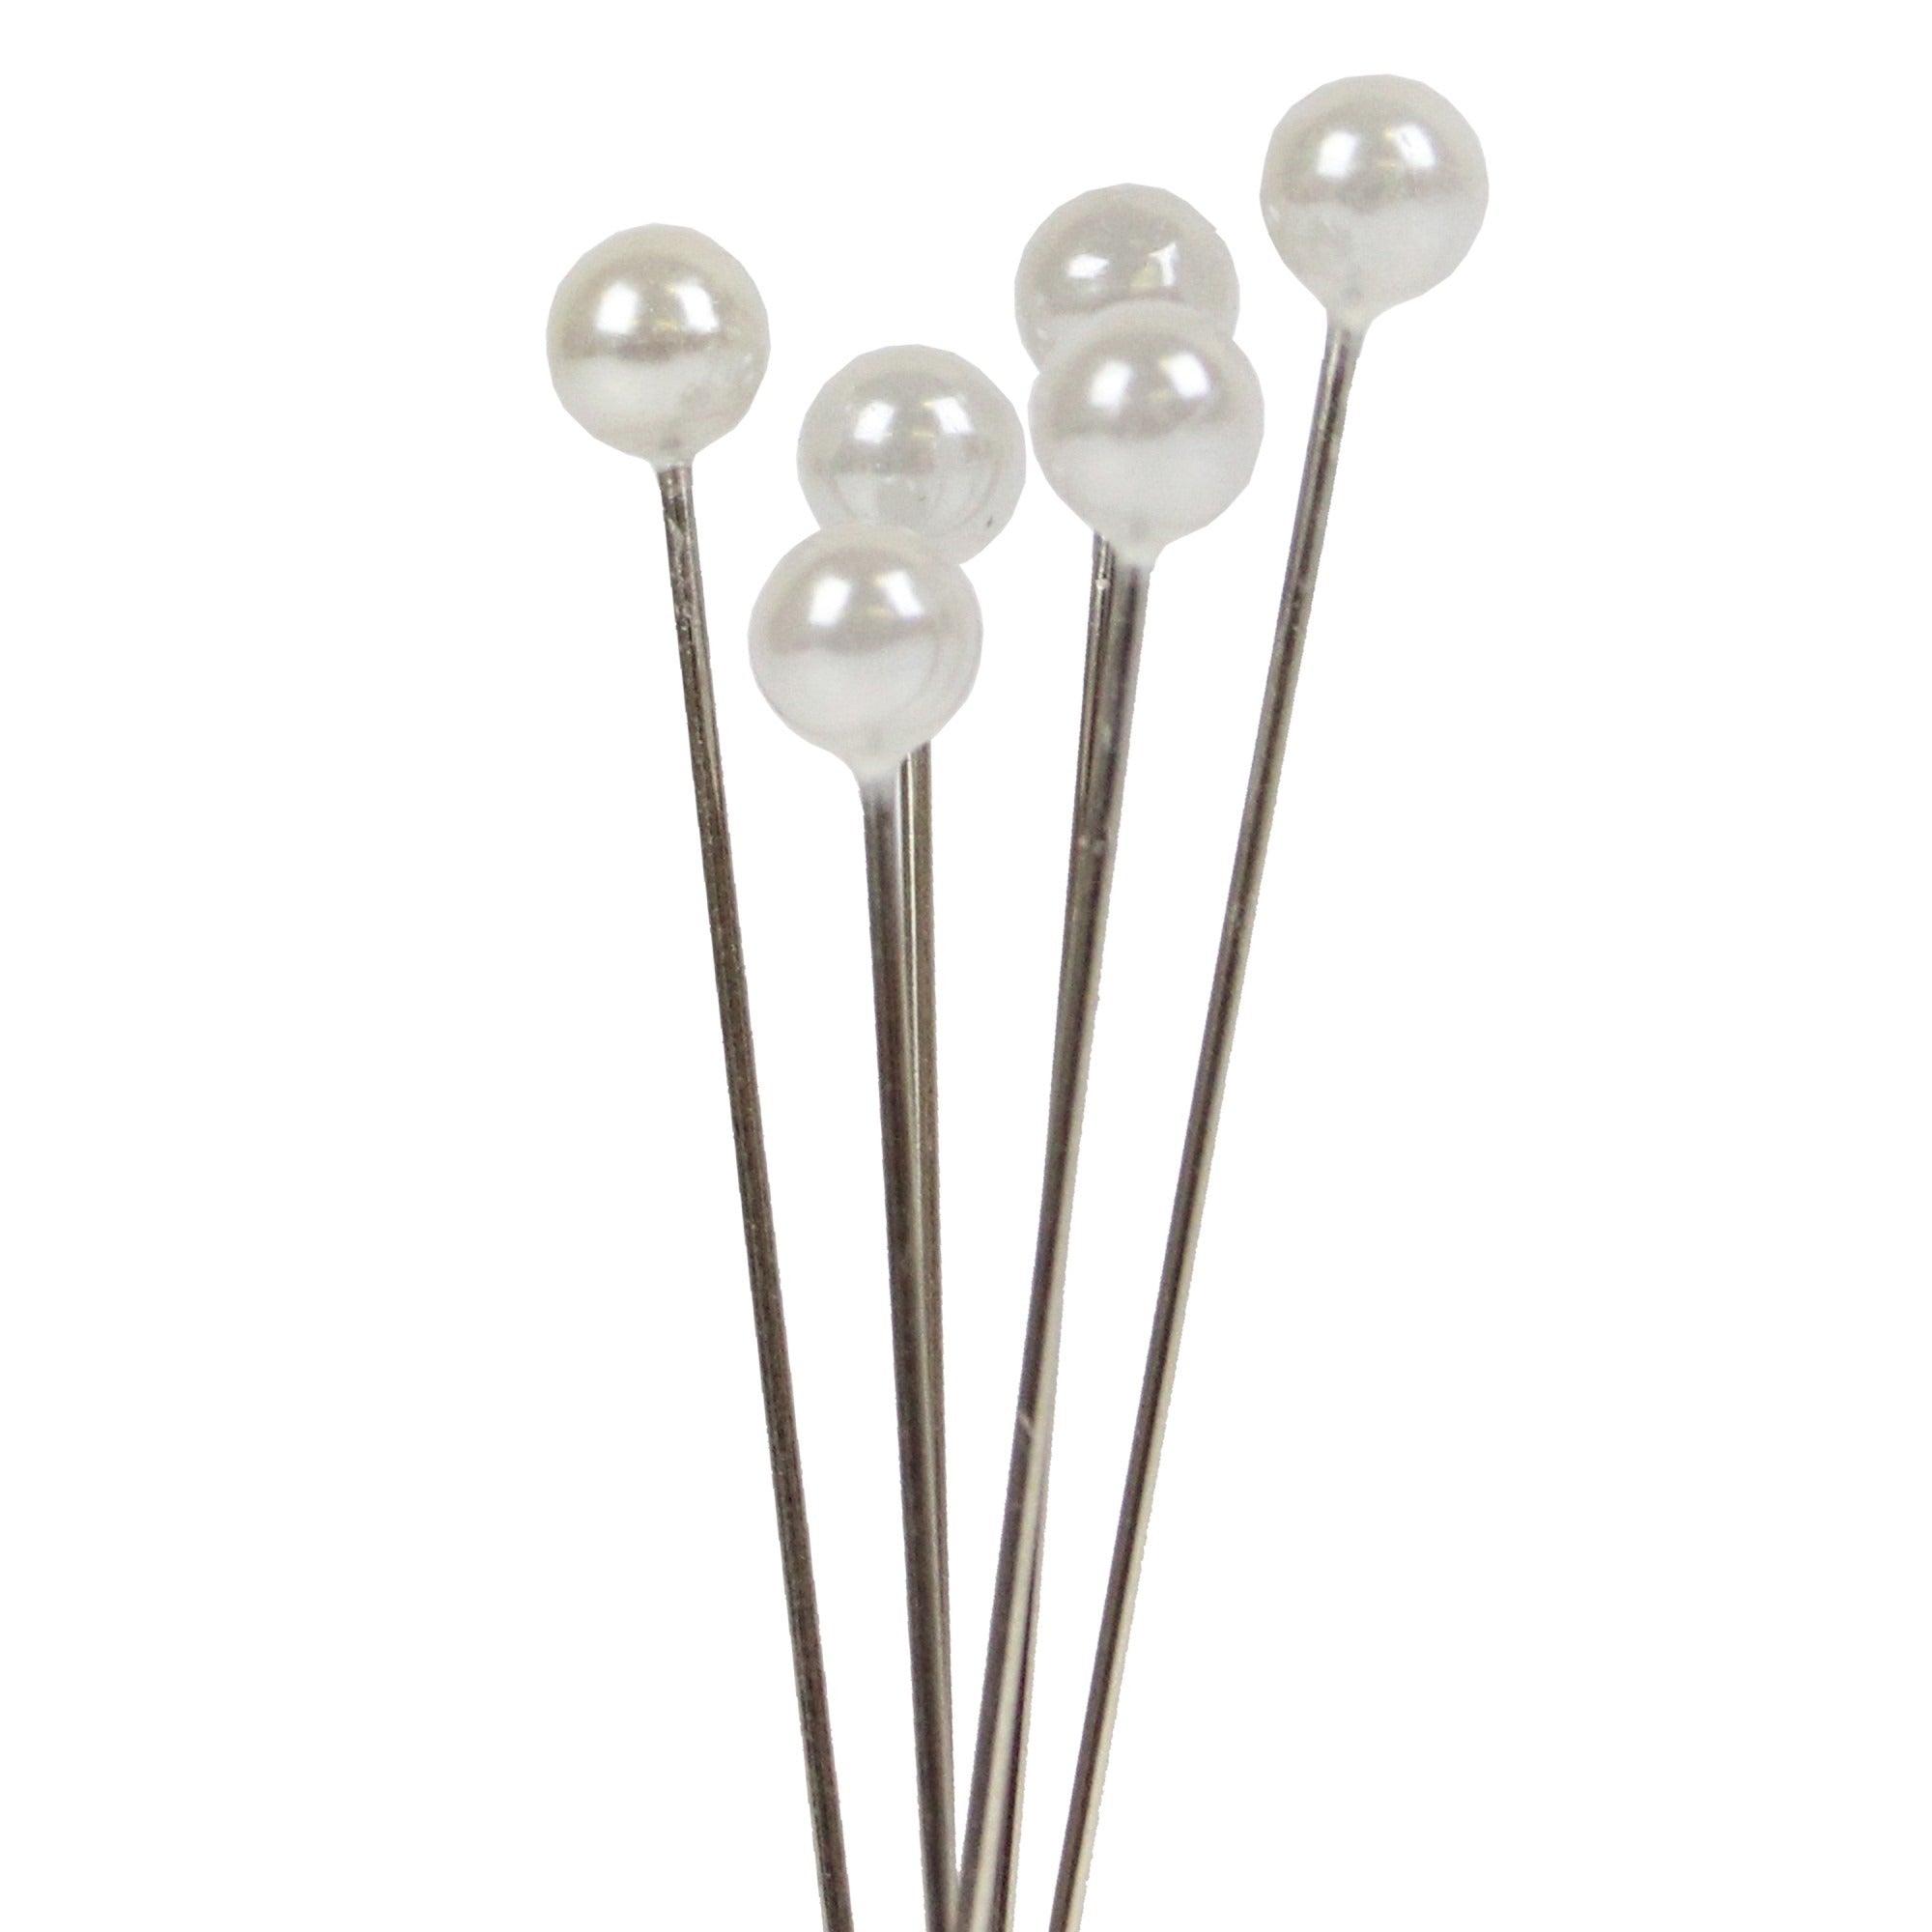 View White 5cm Pearl Headed Pins information